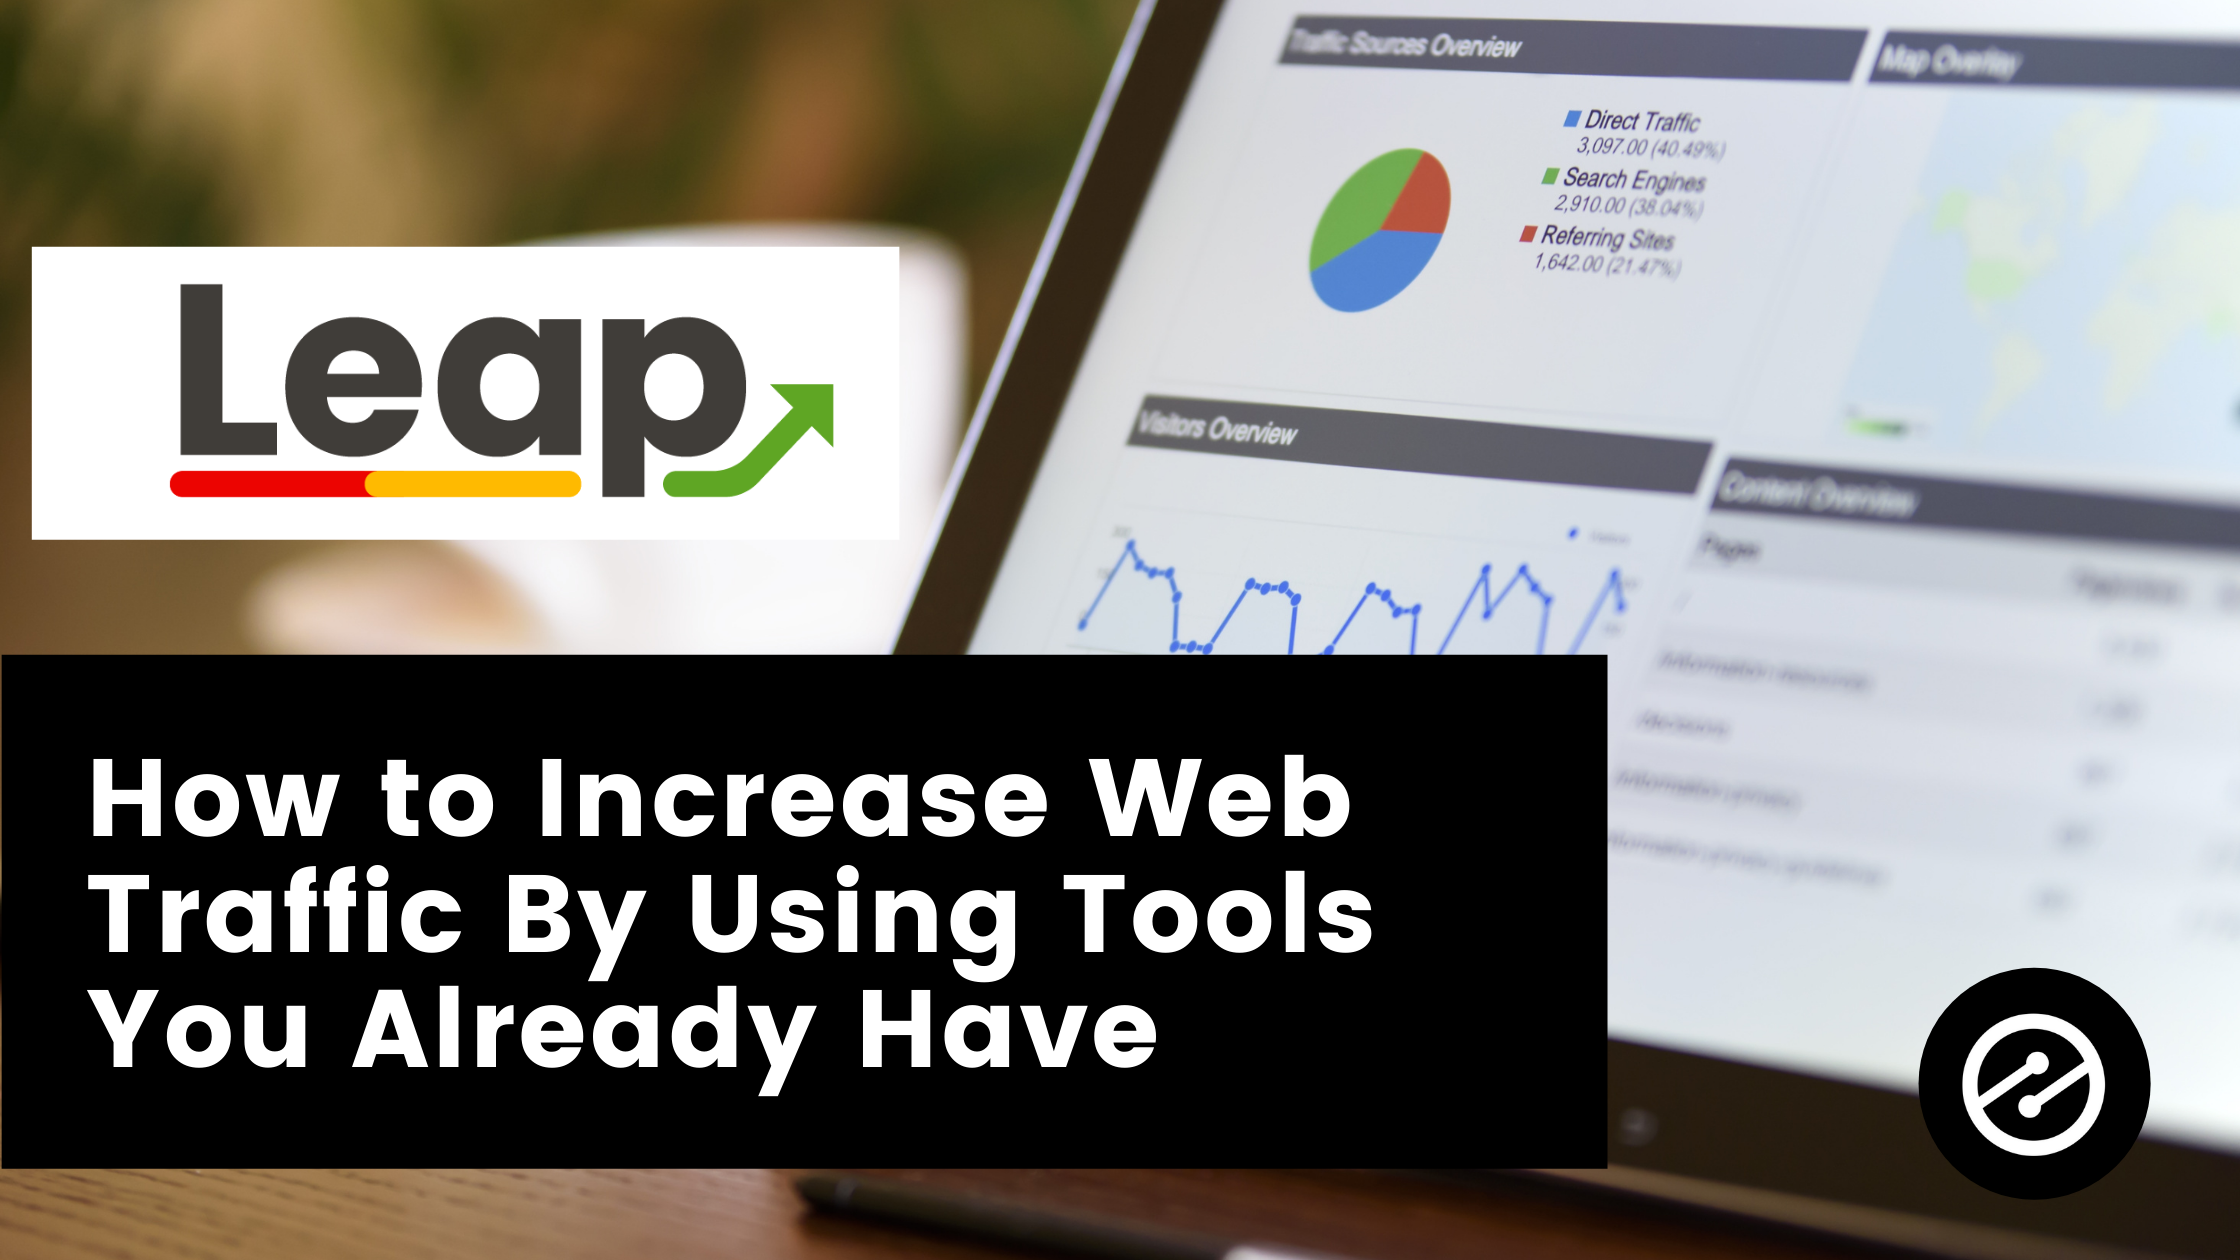 How to Increase Web Traffic By Using Tools You Already Have